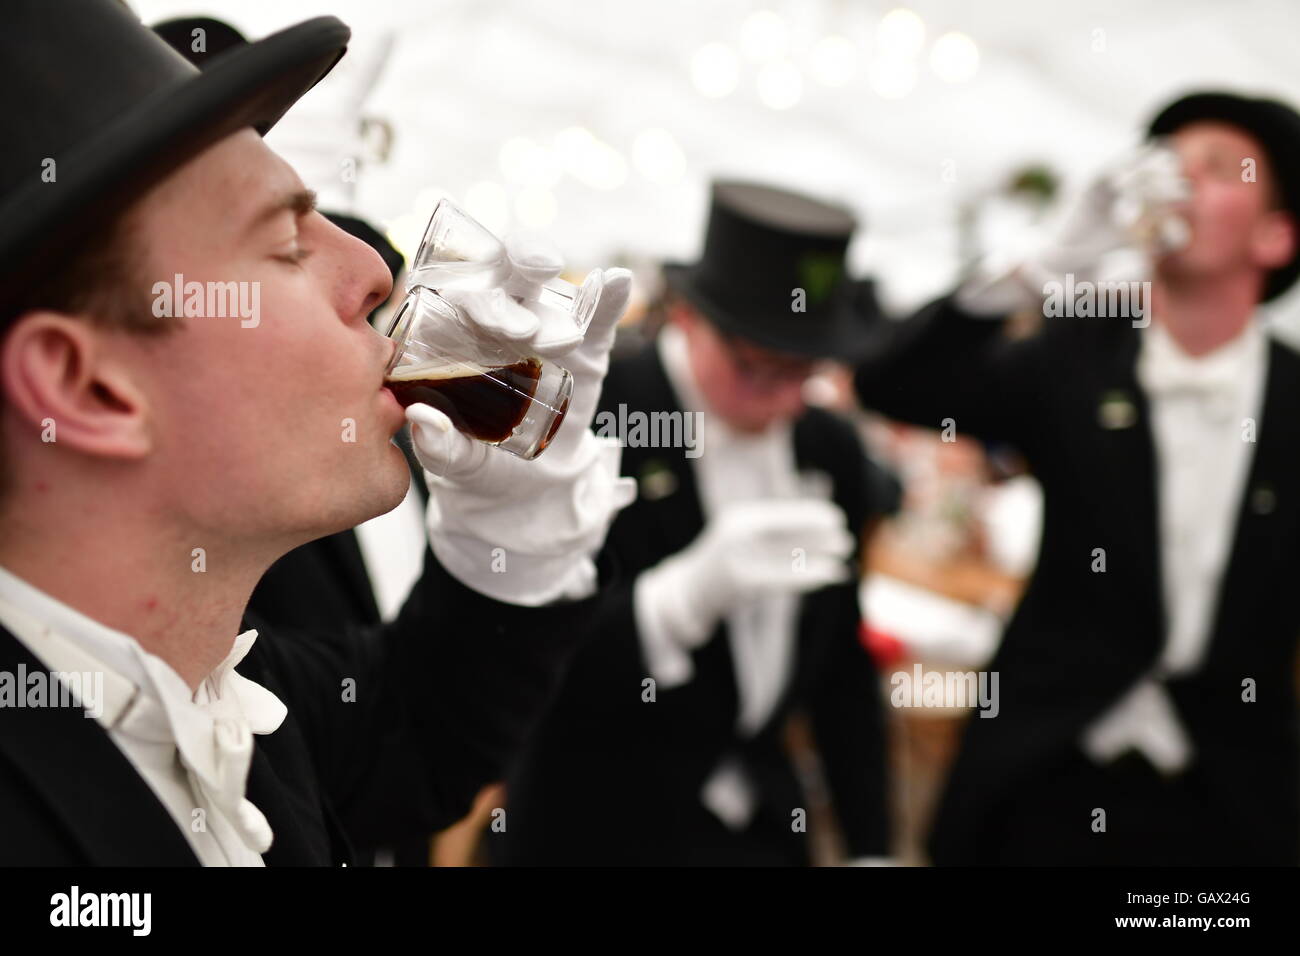 Bruchmeister Maximilian Bode-Meyer drinks a 'Luttje Lage', consisting of dark, top-fermented beer and corn schnapps, at the marksmen's festival Hannover in Hannover, Germany, 6 July 2016. It has been the custom since 1303 that the four special guards care for security in the city. Photo: Alexander Koerner/dpa Stock Photo